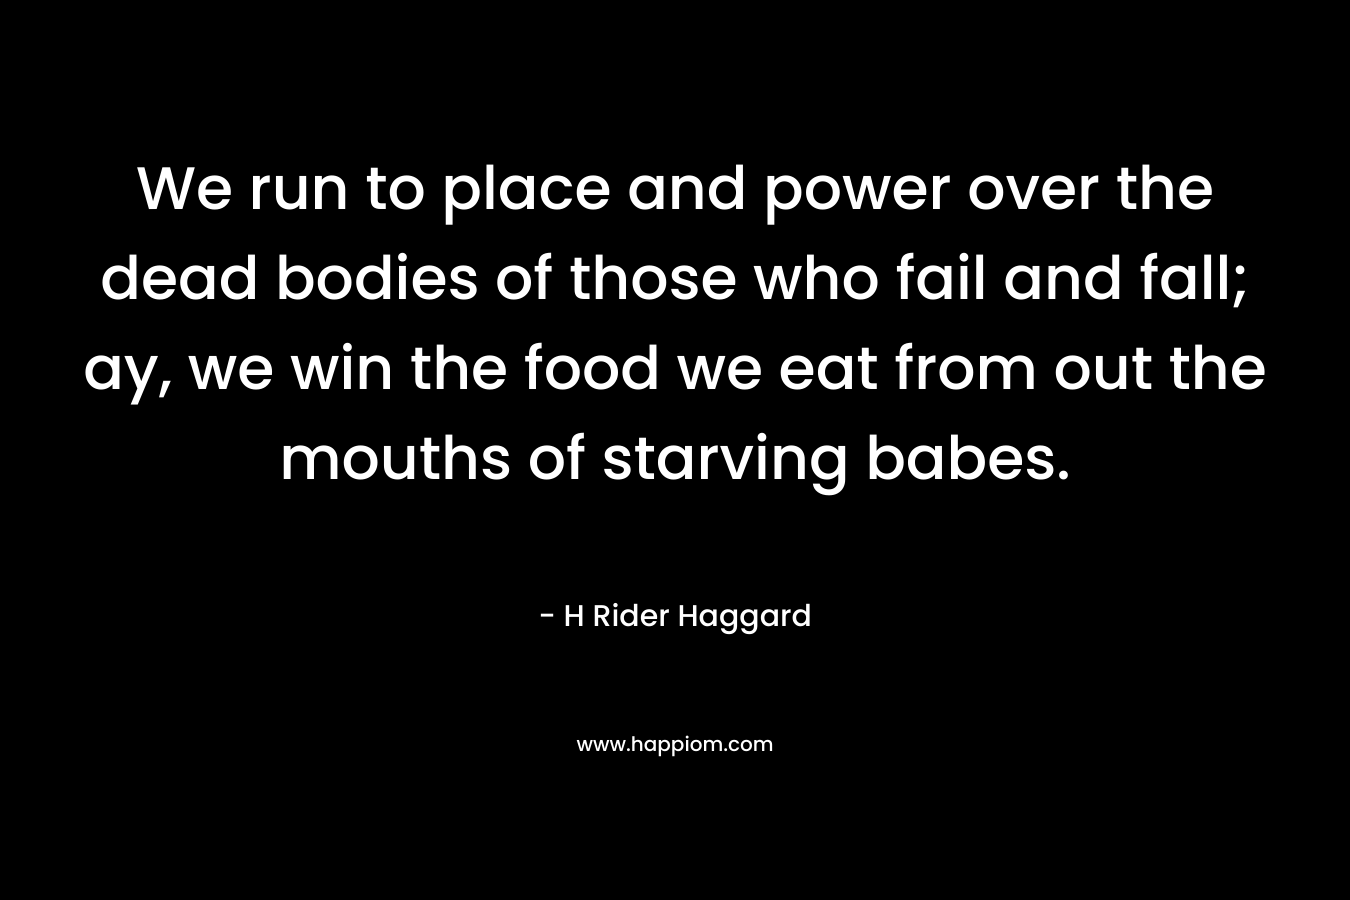 We run to place and power over the dead bodies of those who fail and fall; ay, we win the food we eat from out the mouths of starving babes. – H Rider Haggard